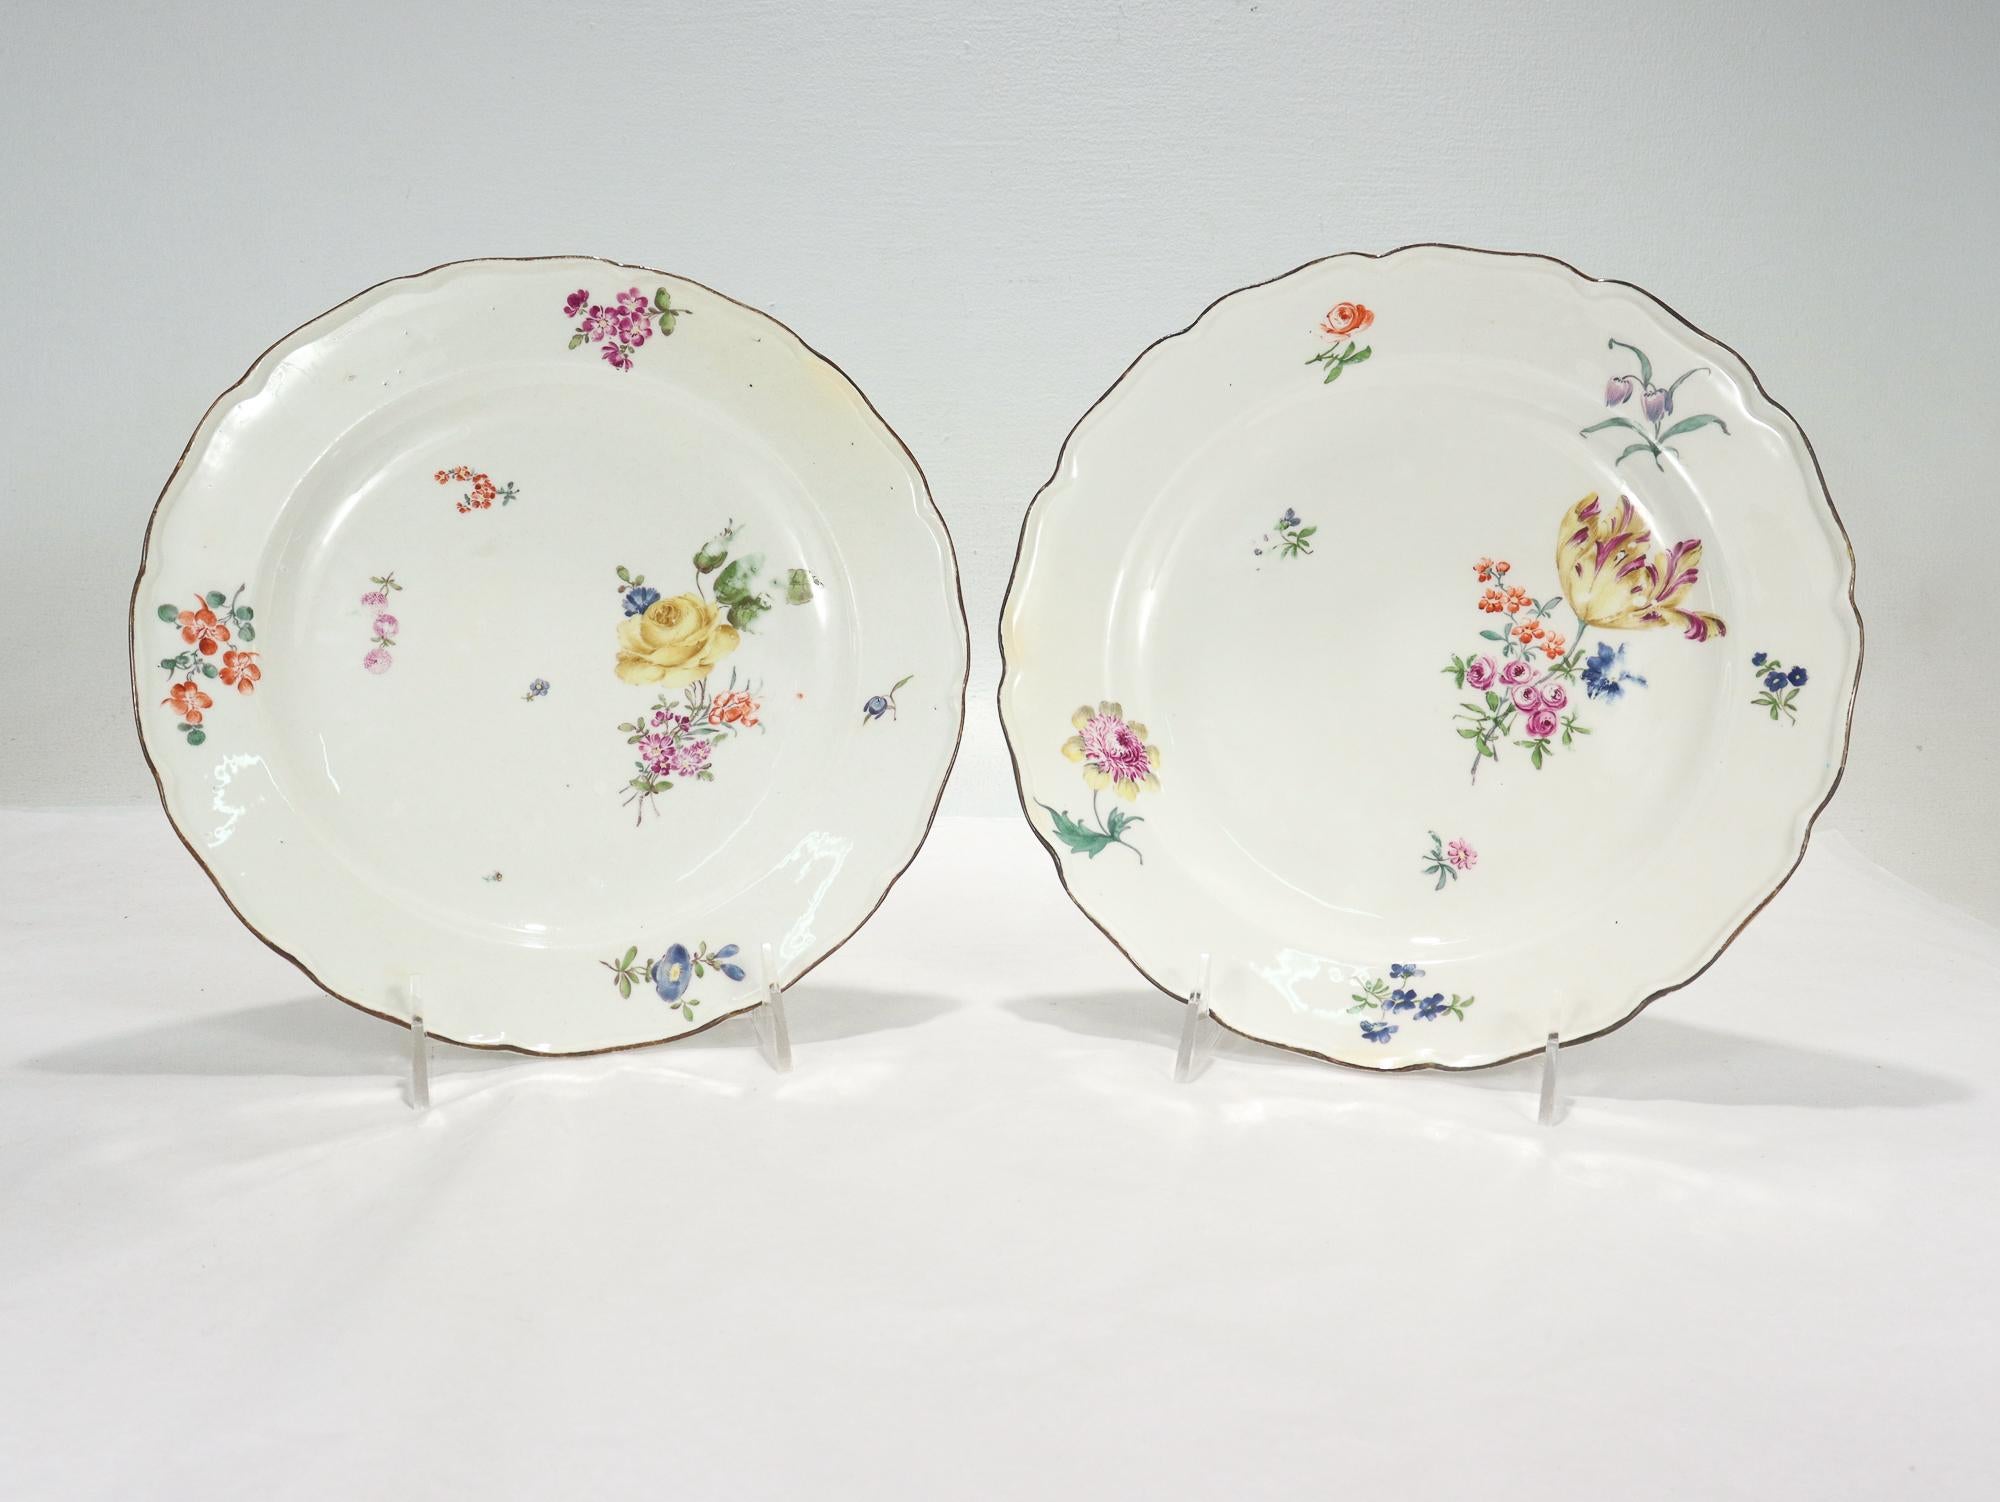 A fine pair of antique Neuer Ausschnitt (New Cut) pattern porcelain plates.

By the Royal Meissen Porcelain Manufactory.

Decorated with Deutsche Blumen floral sprays to the center and sides including roses, tulips, morning glories, and other